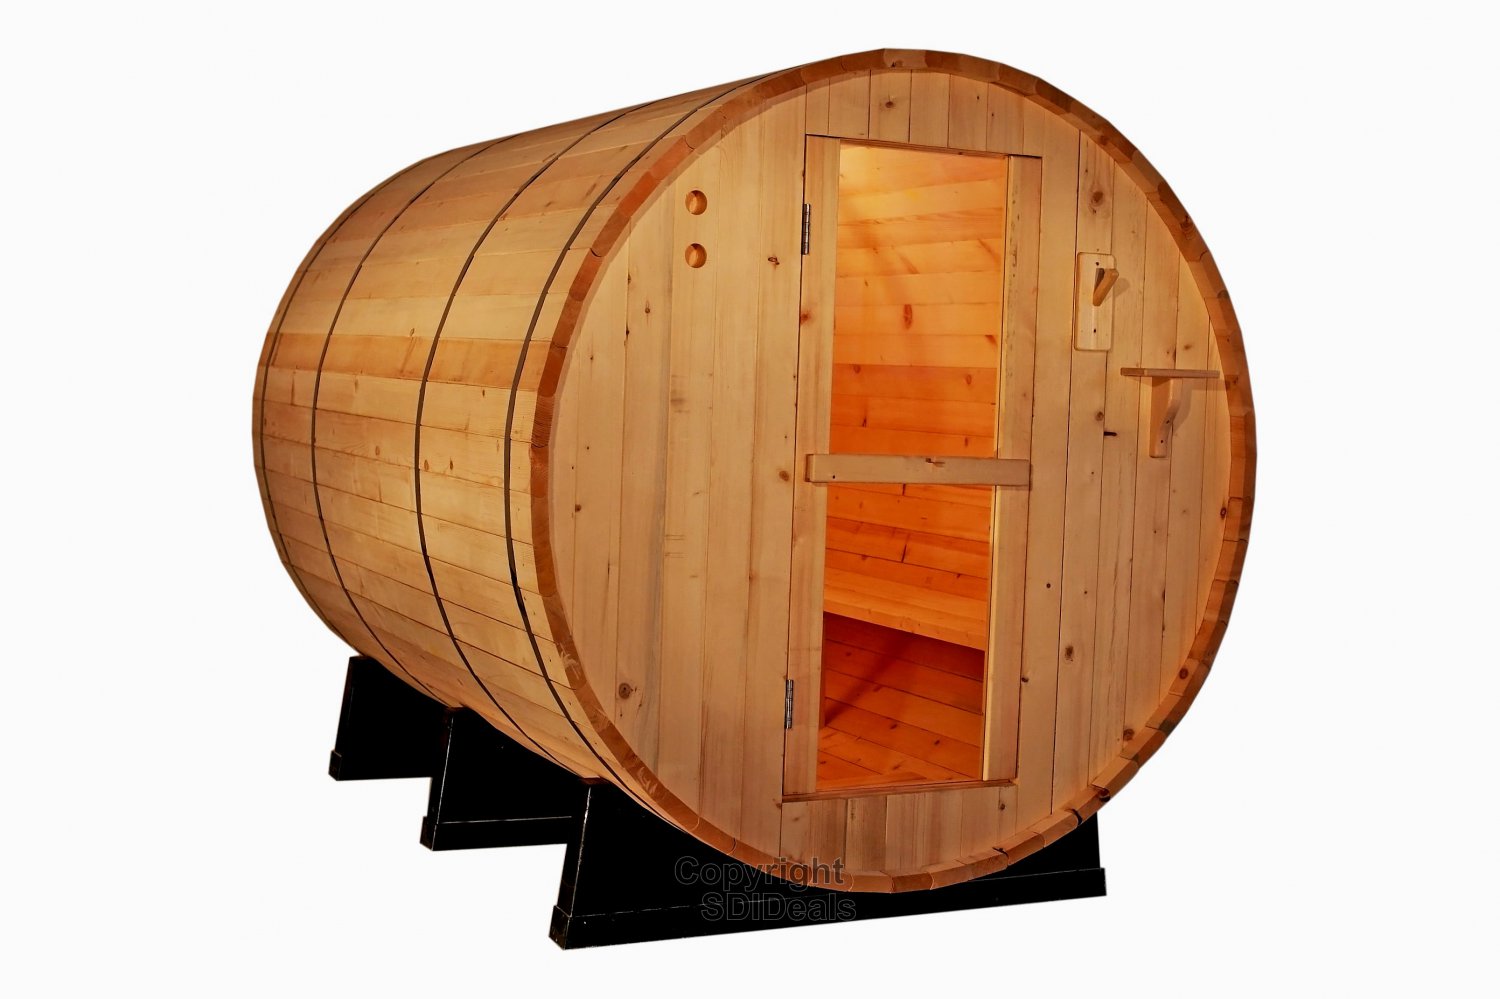 6' Foot Canadian Outdoor Pine Wood 4 Person Barrel Sauna Wet/Dry SPA 9KW Electric Heater Lava Rocks